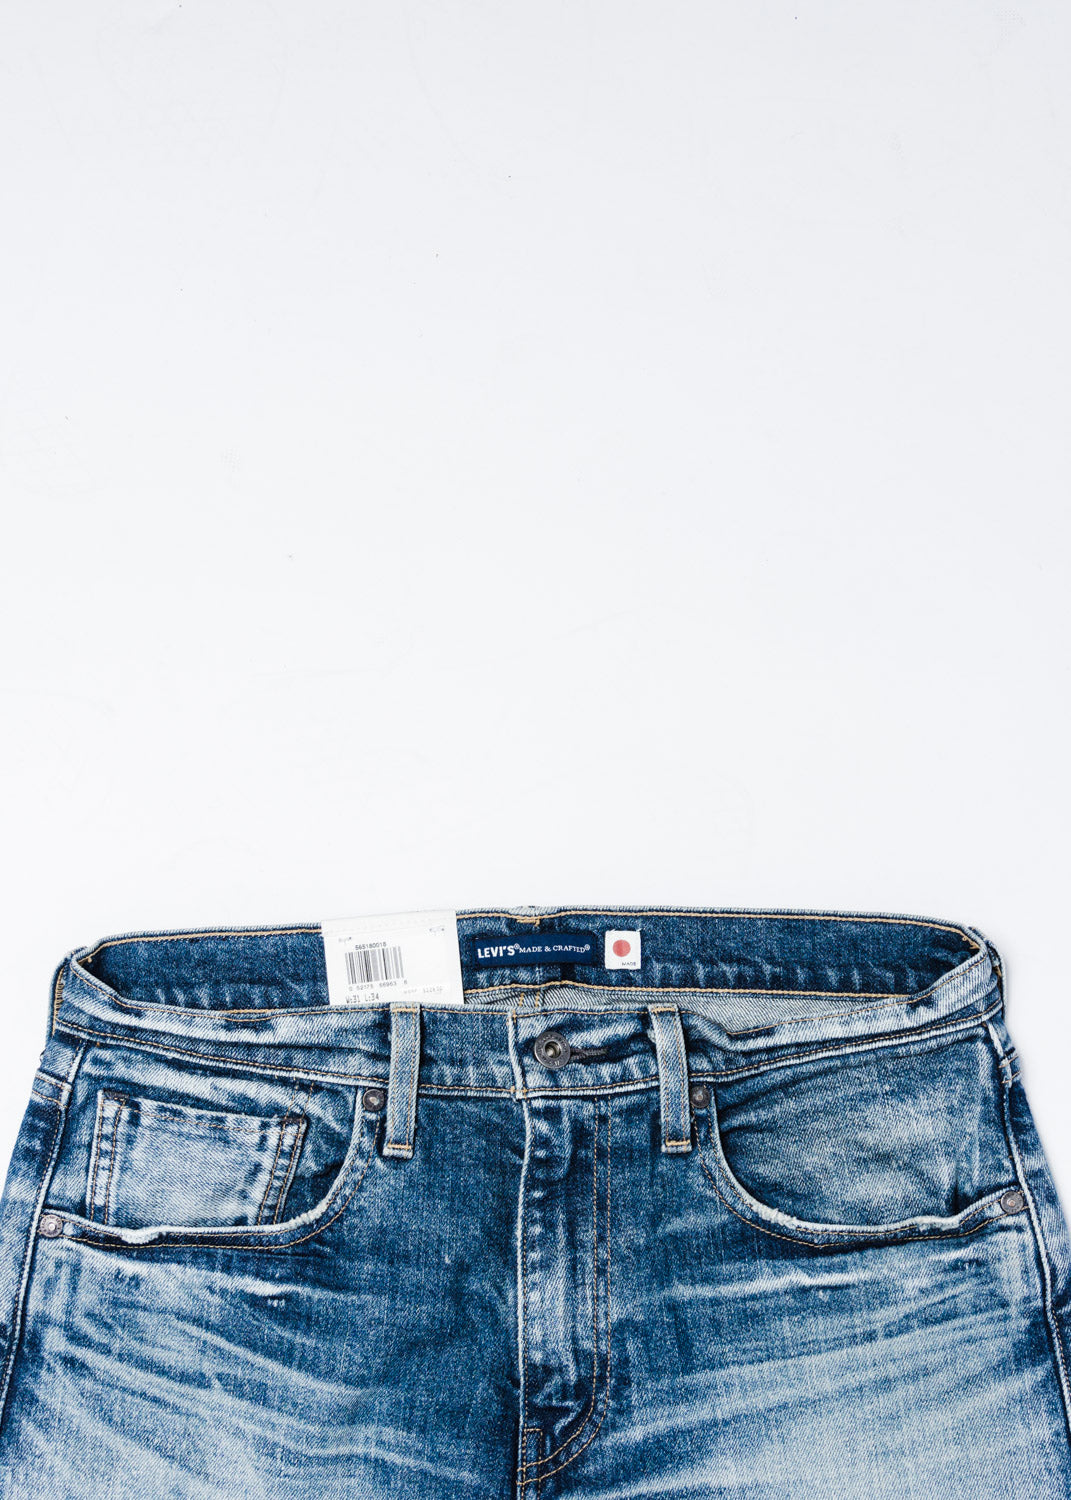 levis handmade and crafted